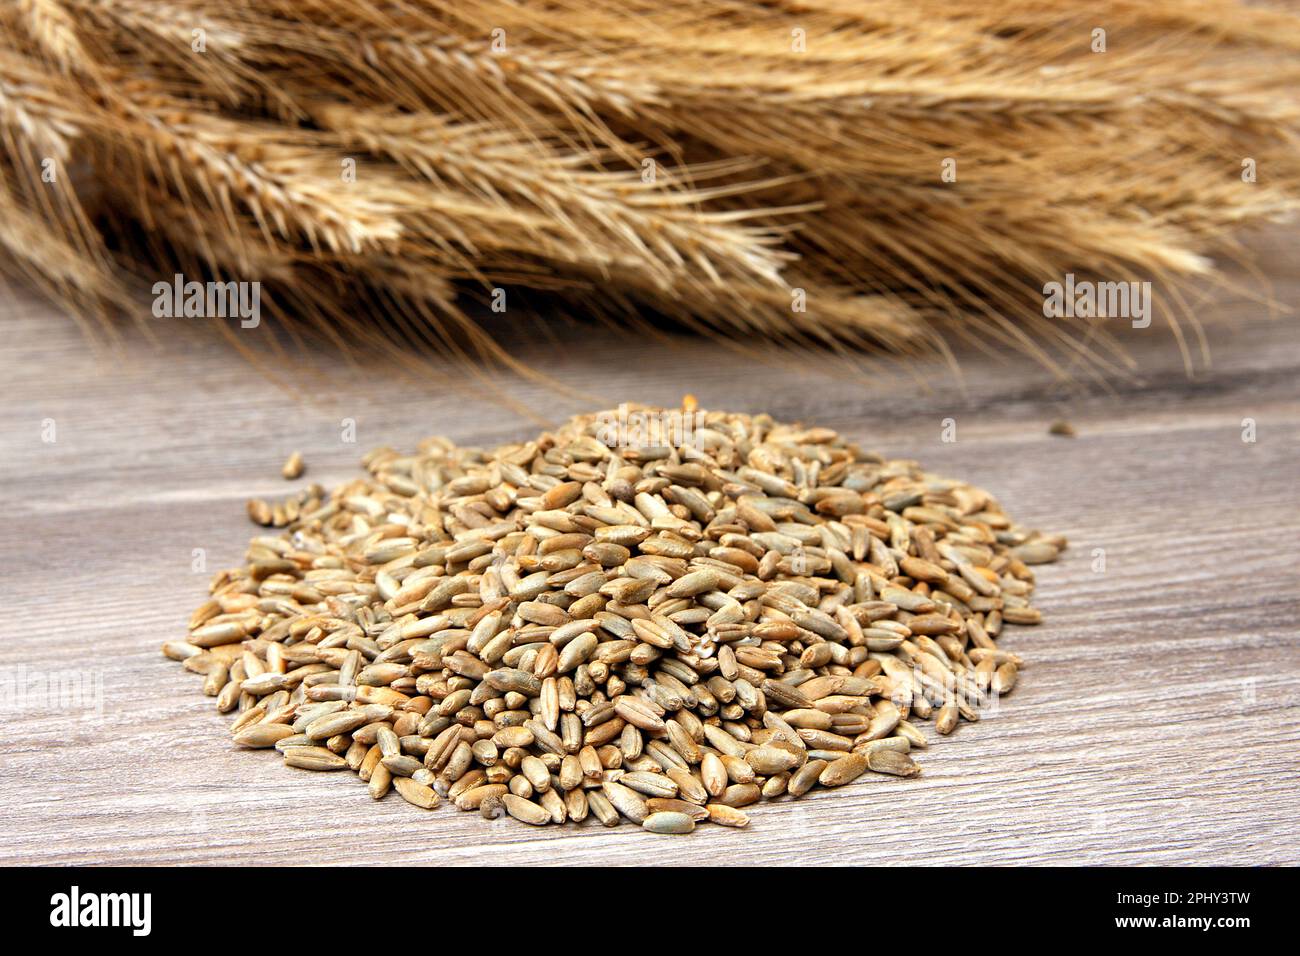 cultivated rye (Secale cereale), rye spikes and grains Stock Photo